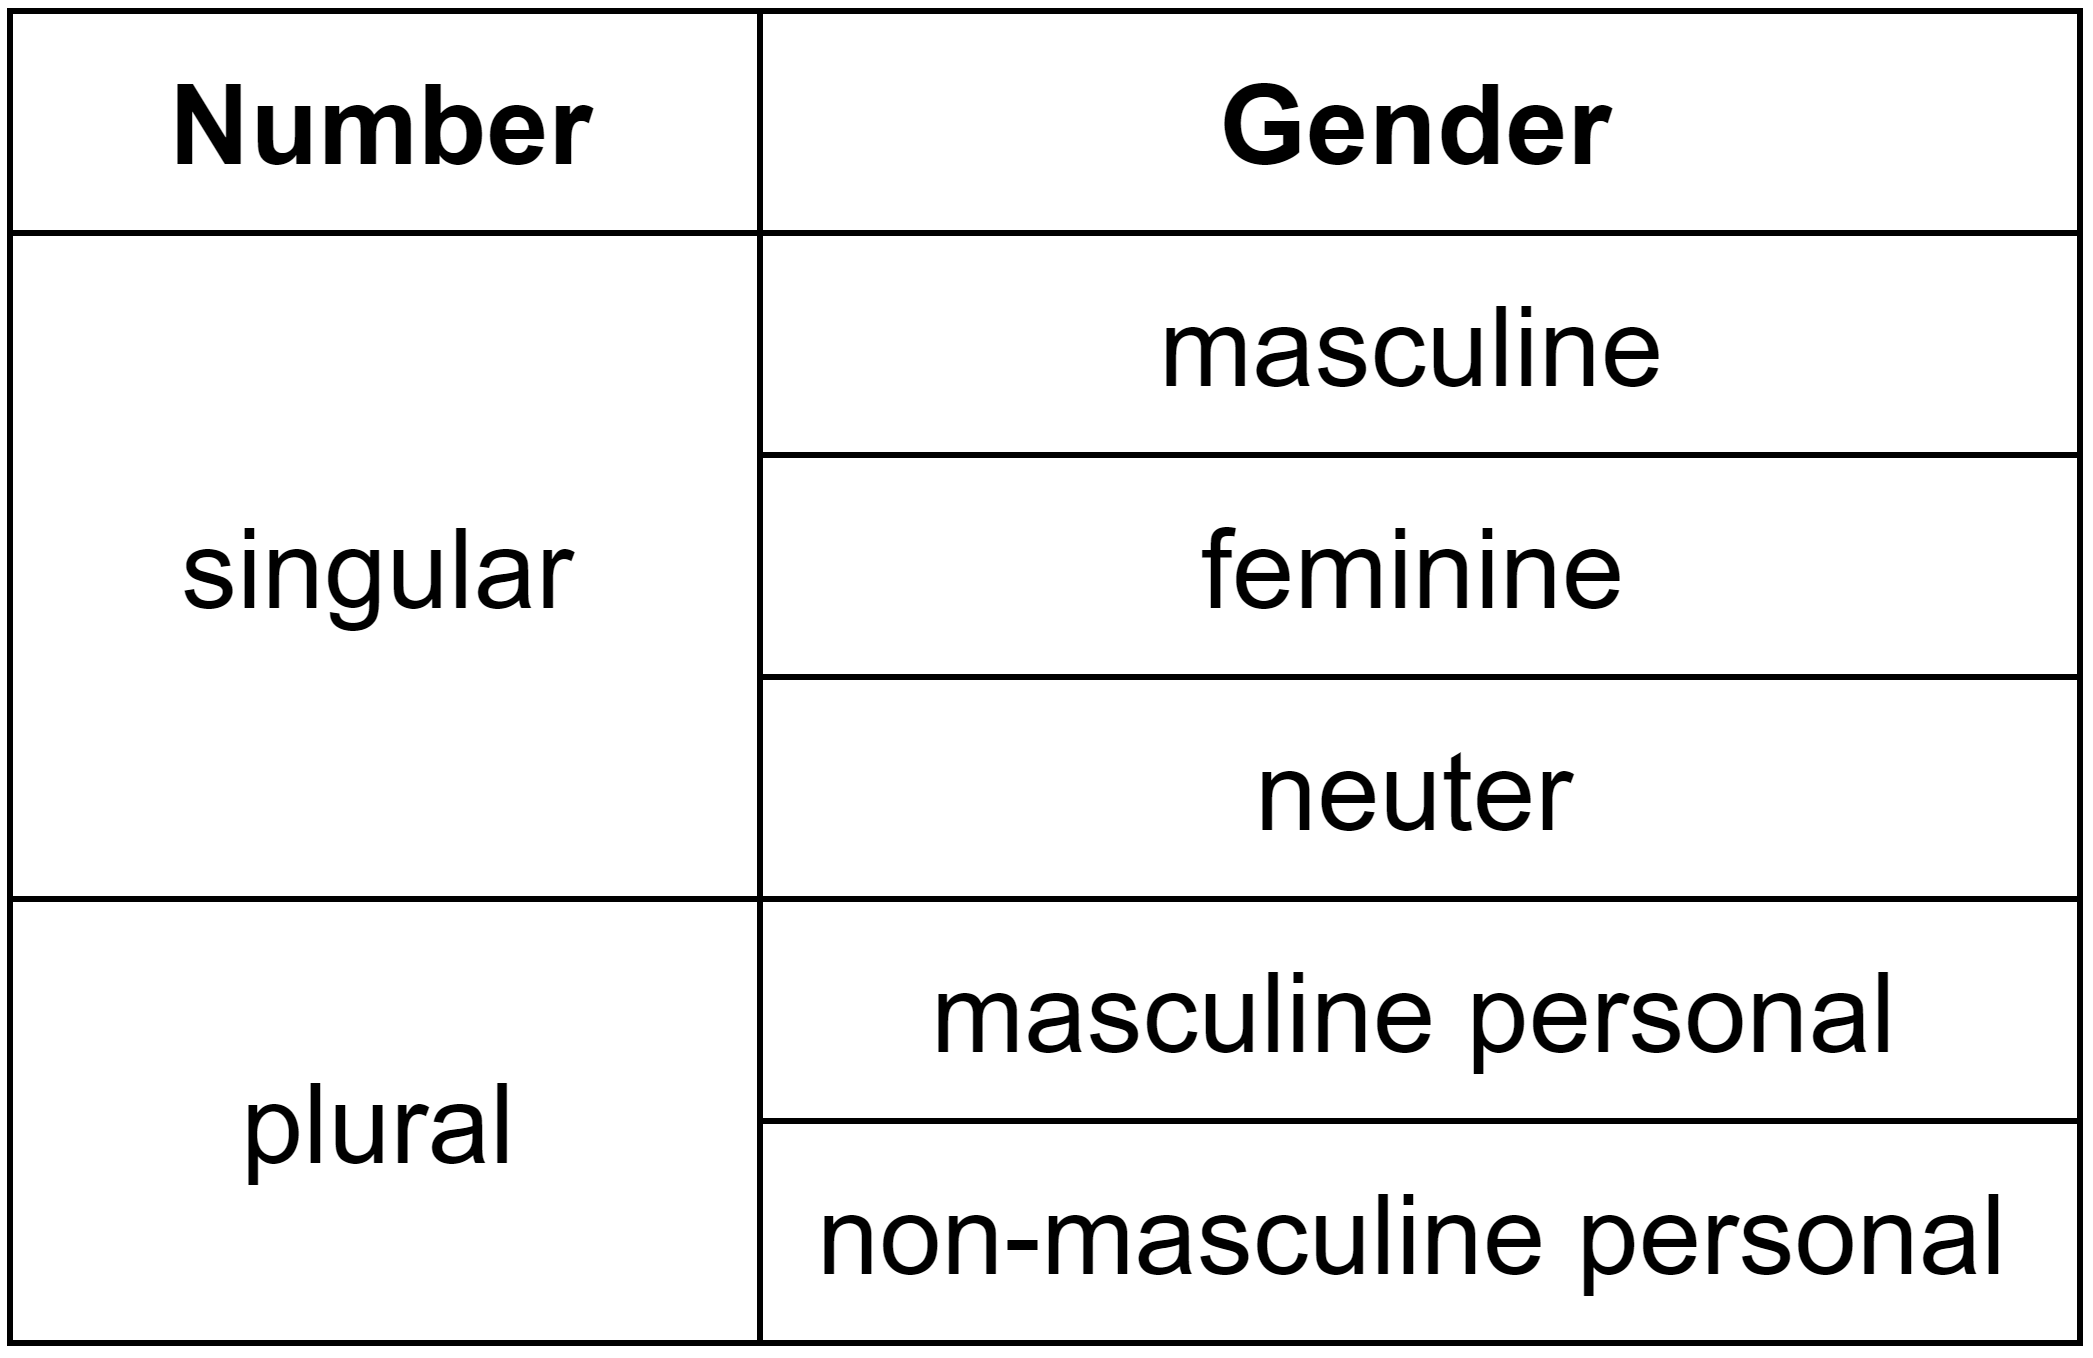 Grammatical number and gender in Polish adjectives